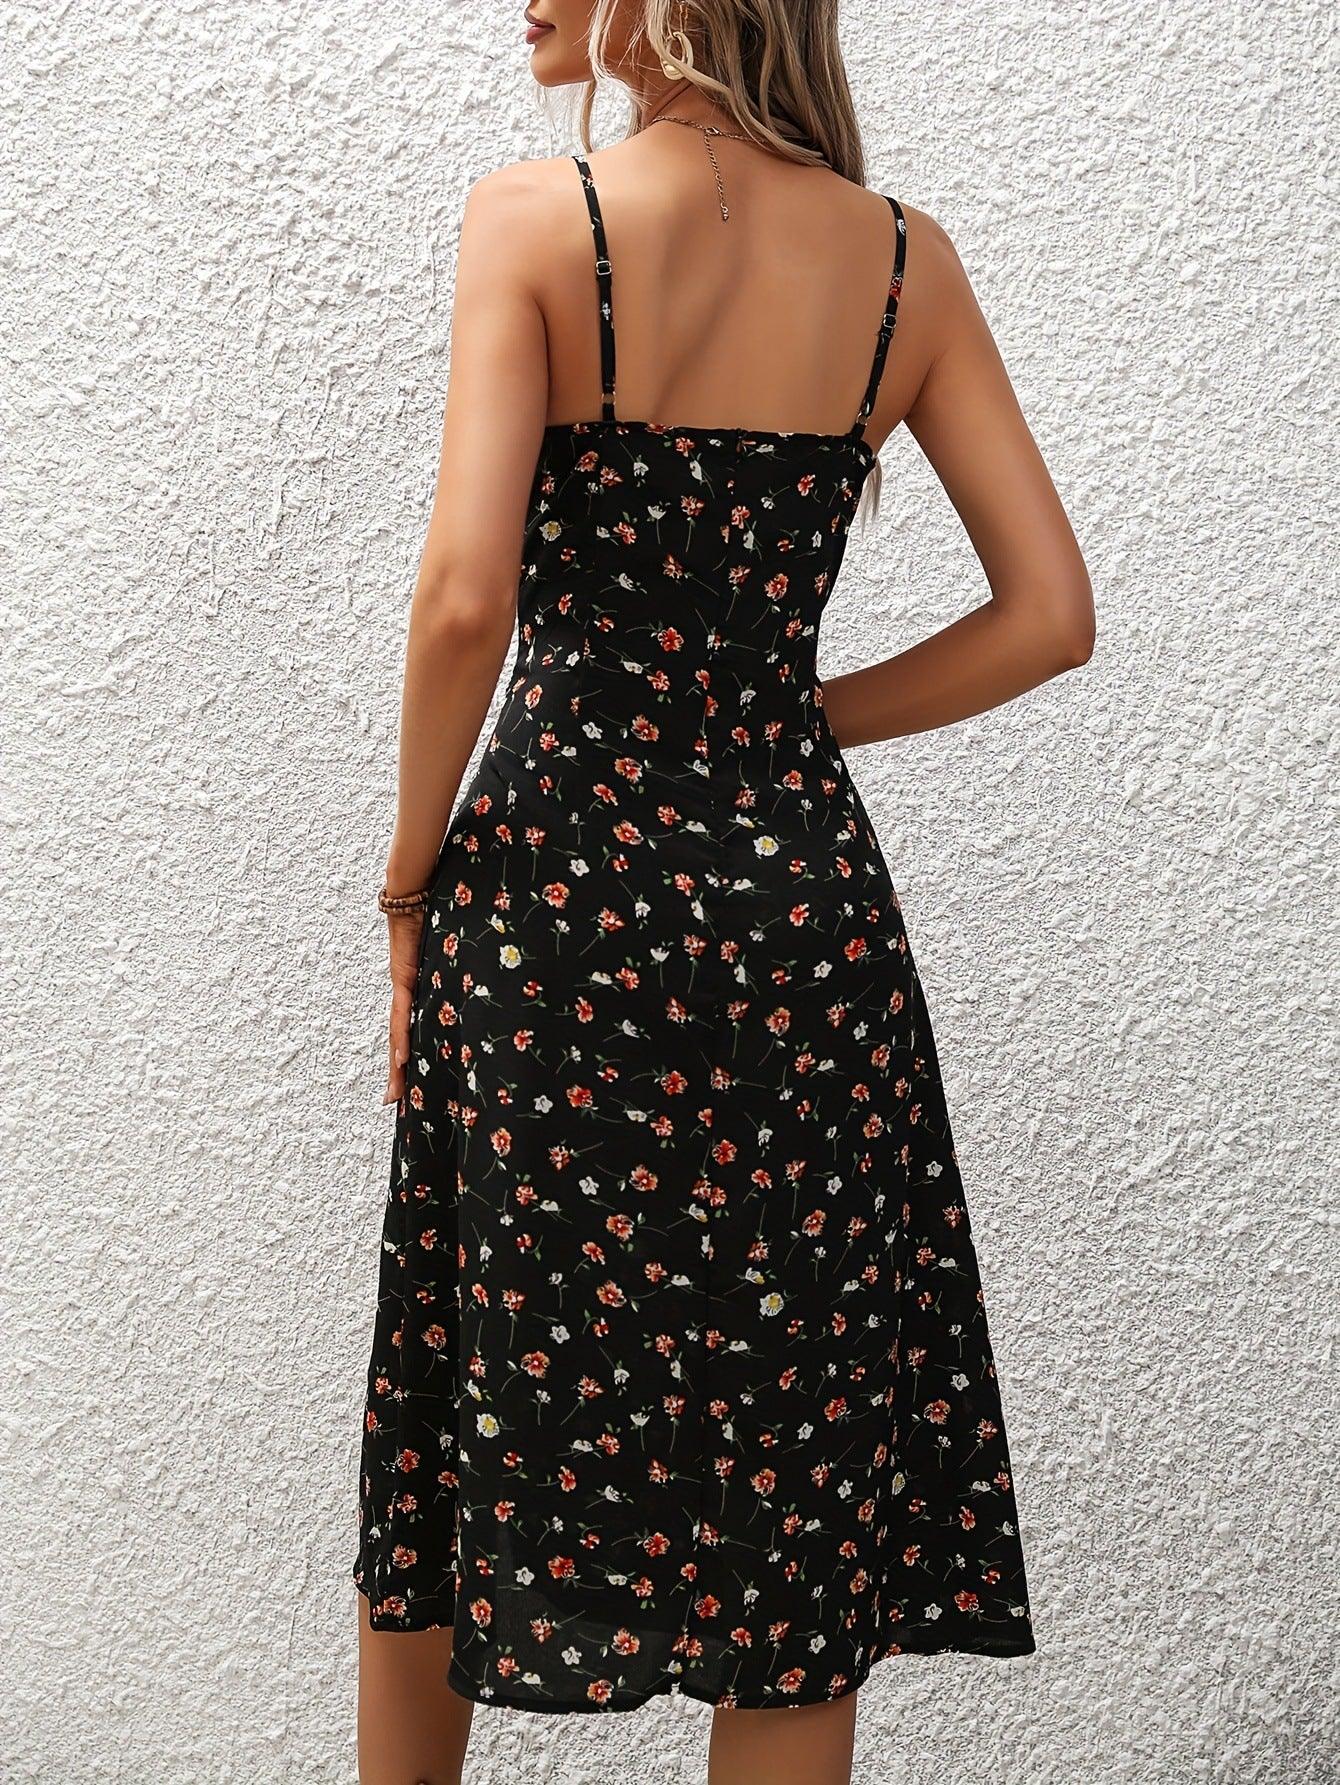 New Polka Dot Print Suspender Dress Summer Sexy Slit Long Dresses For Womens Clothing - Comfortably chic